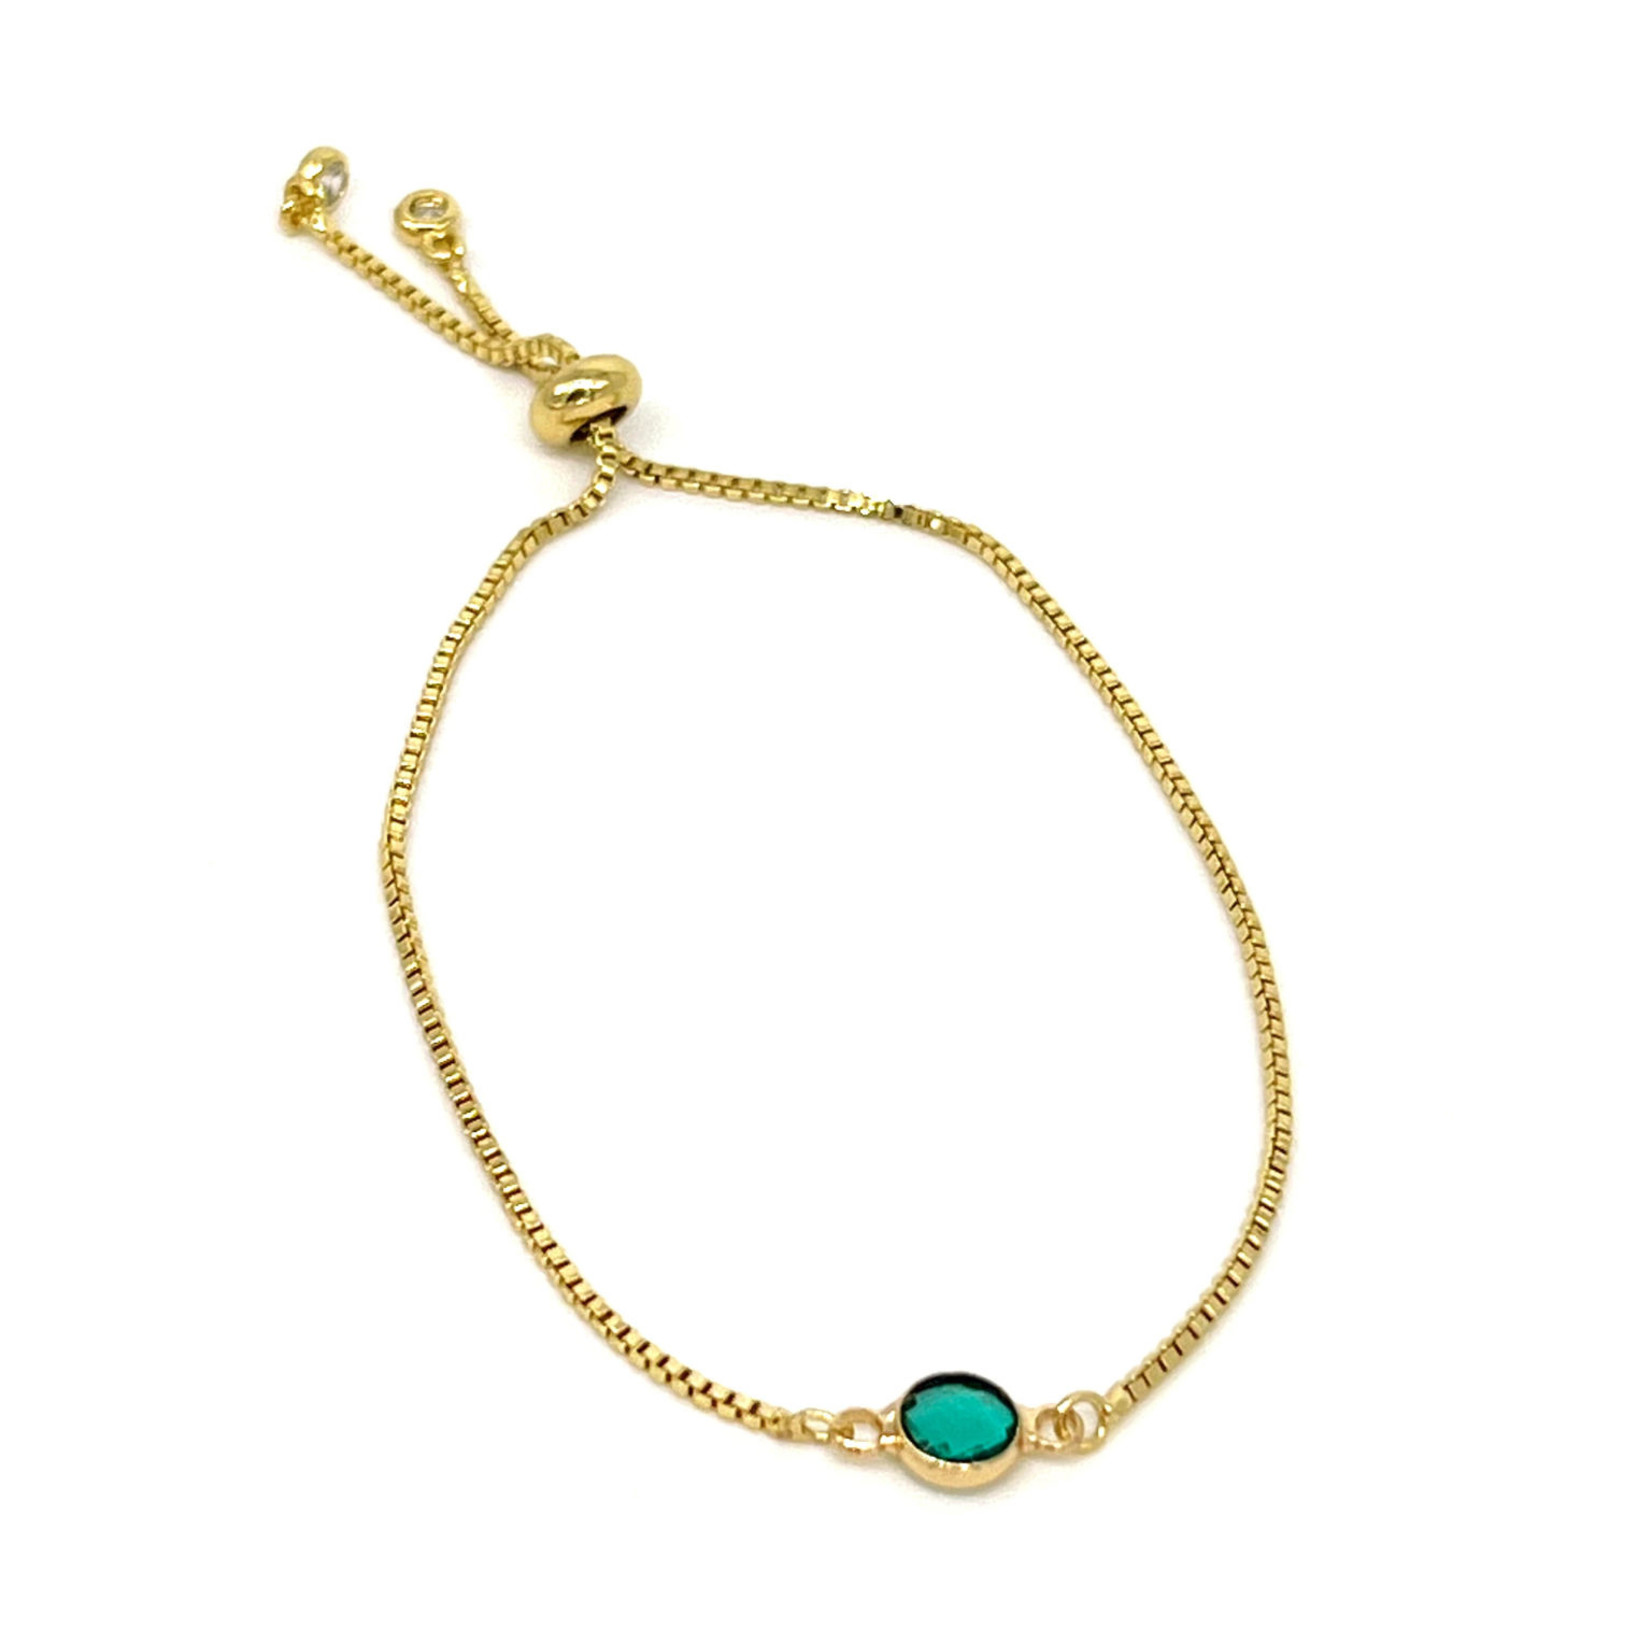 Brass and Glass Bead Adjustable Bracelet Round Green